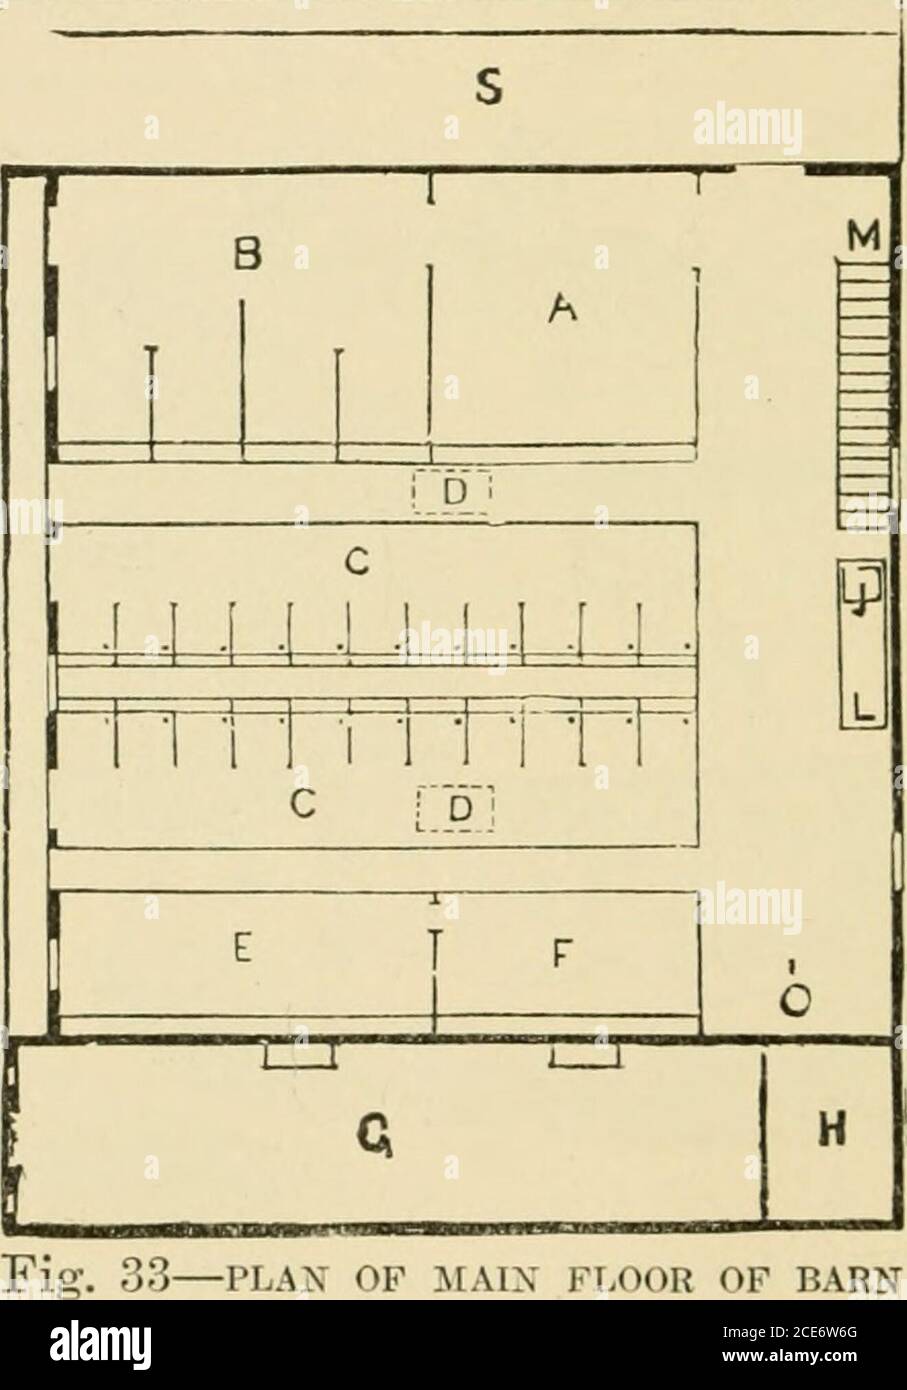 Barn plans and outbuildings . Fig. 32—ELEVATION OF BARN AND STABLE side  furnish ample light and ventilation. The founda-tion walls are of stone,  sunk three feet below the surface.Drains from the